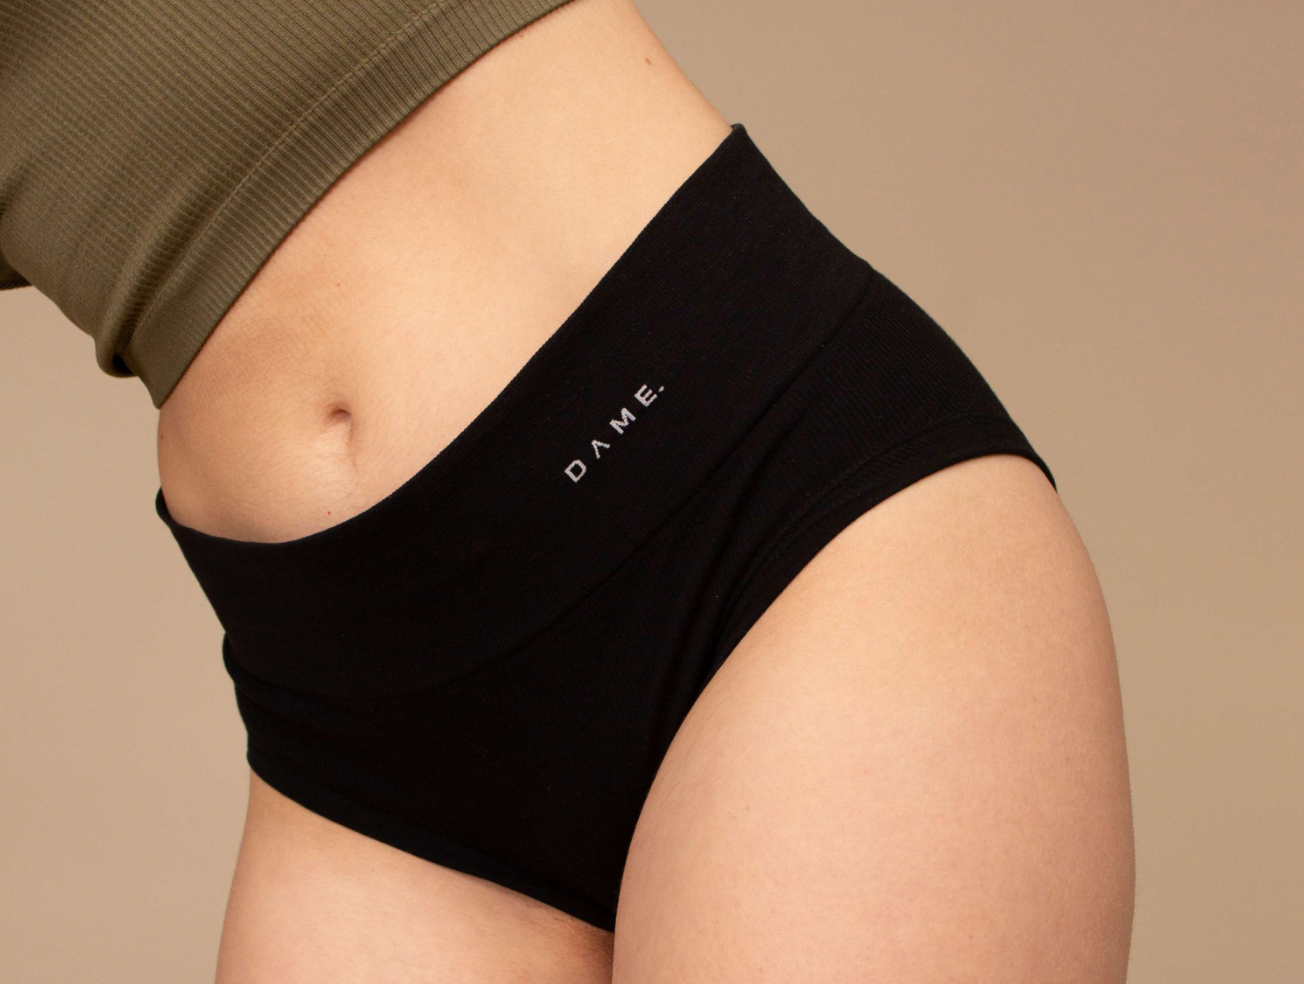 This Canadian Company Makes Leakproof Period Underwear & There's A